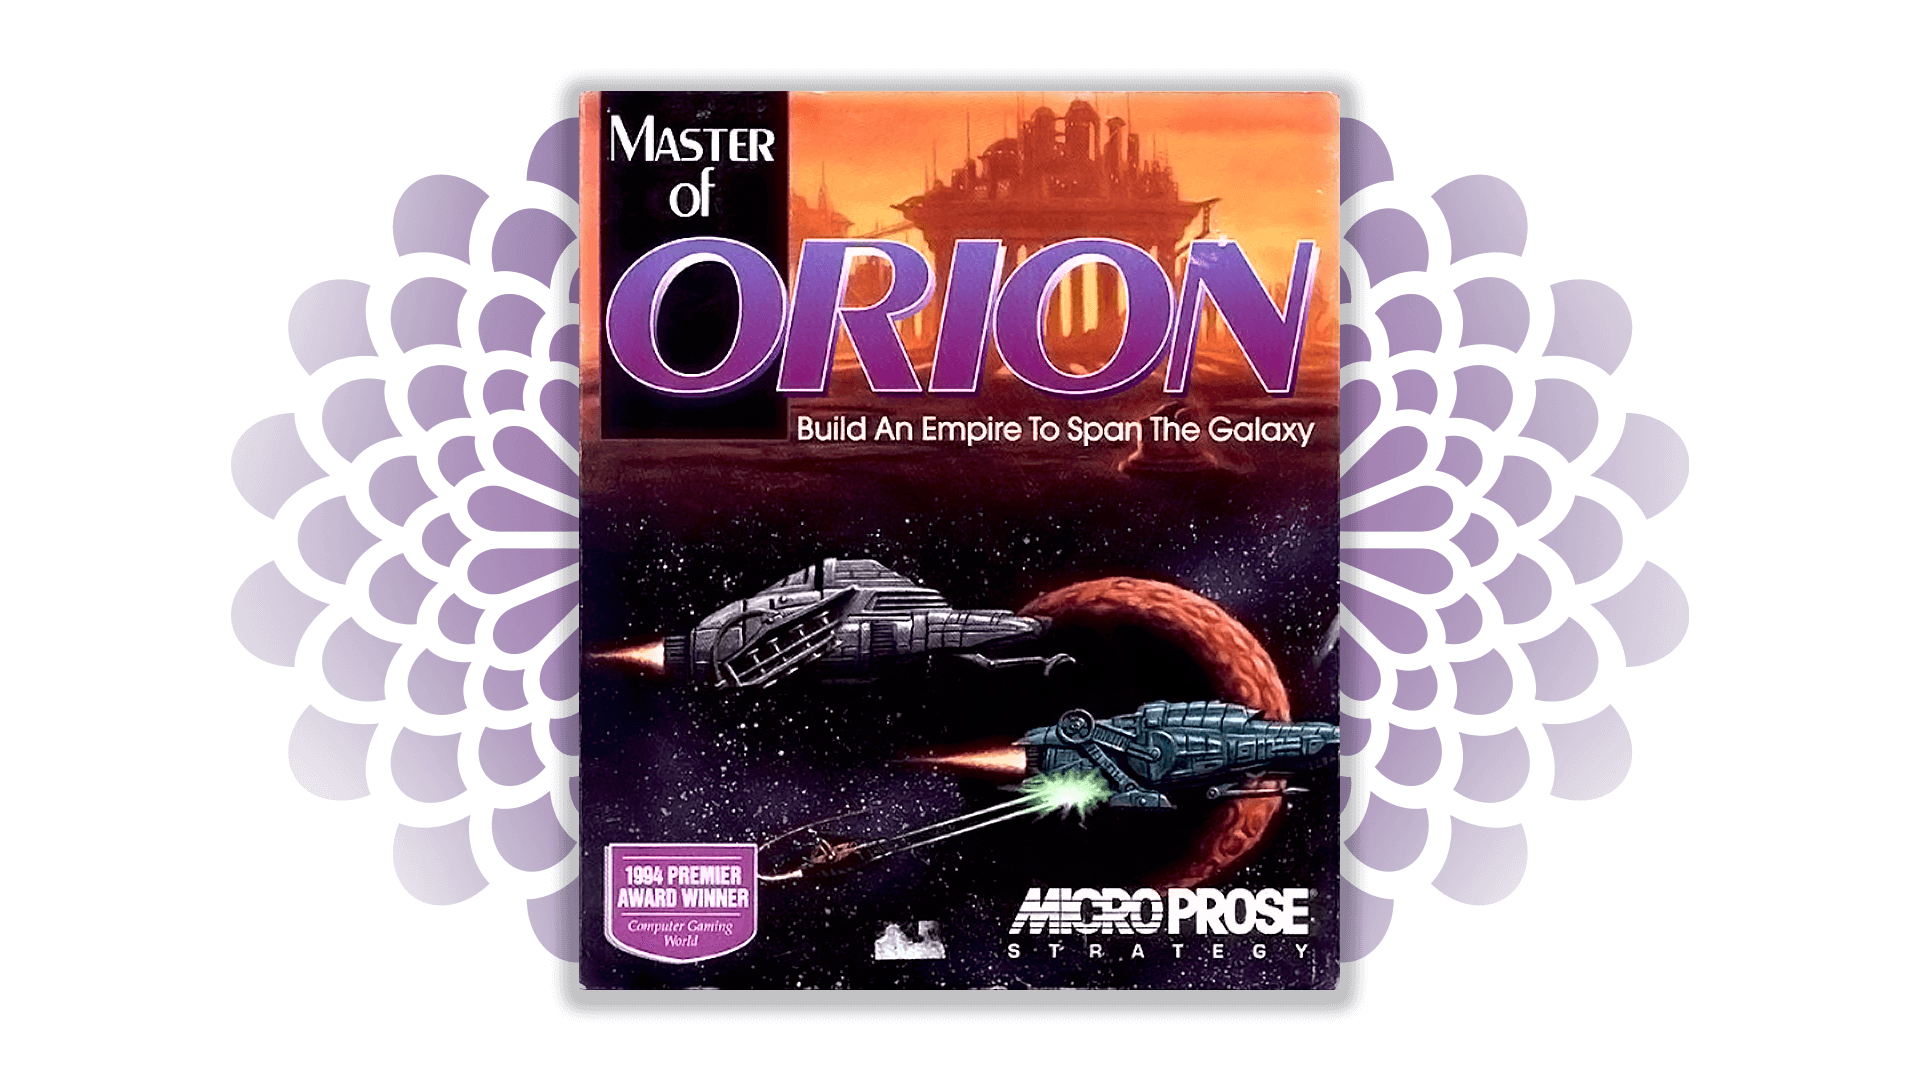 A cover of a computer game called Master of Orion by MicroProse Strategy, with the tagline "Build An Empire To Span The Galaxy." The cover depicts spaceships in a sci-fi world. In the bottom left is an award reading "1994 Premier Award Winner: Computer Gaming World.